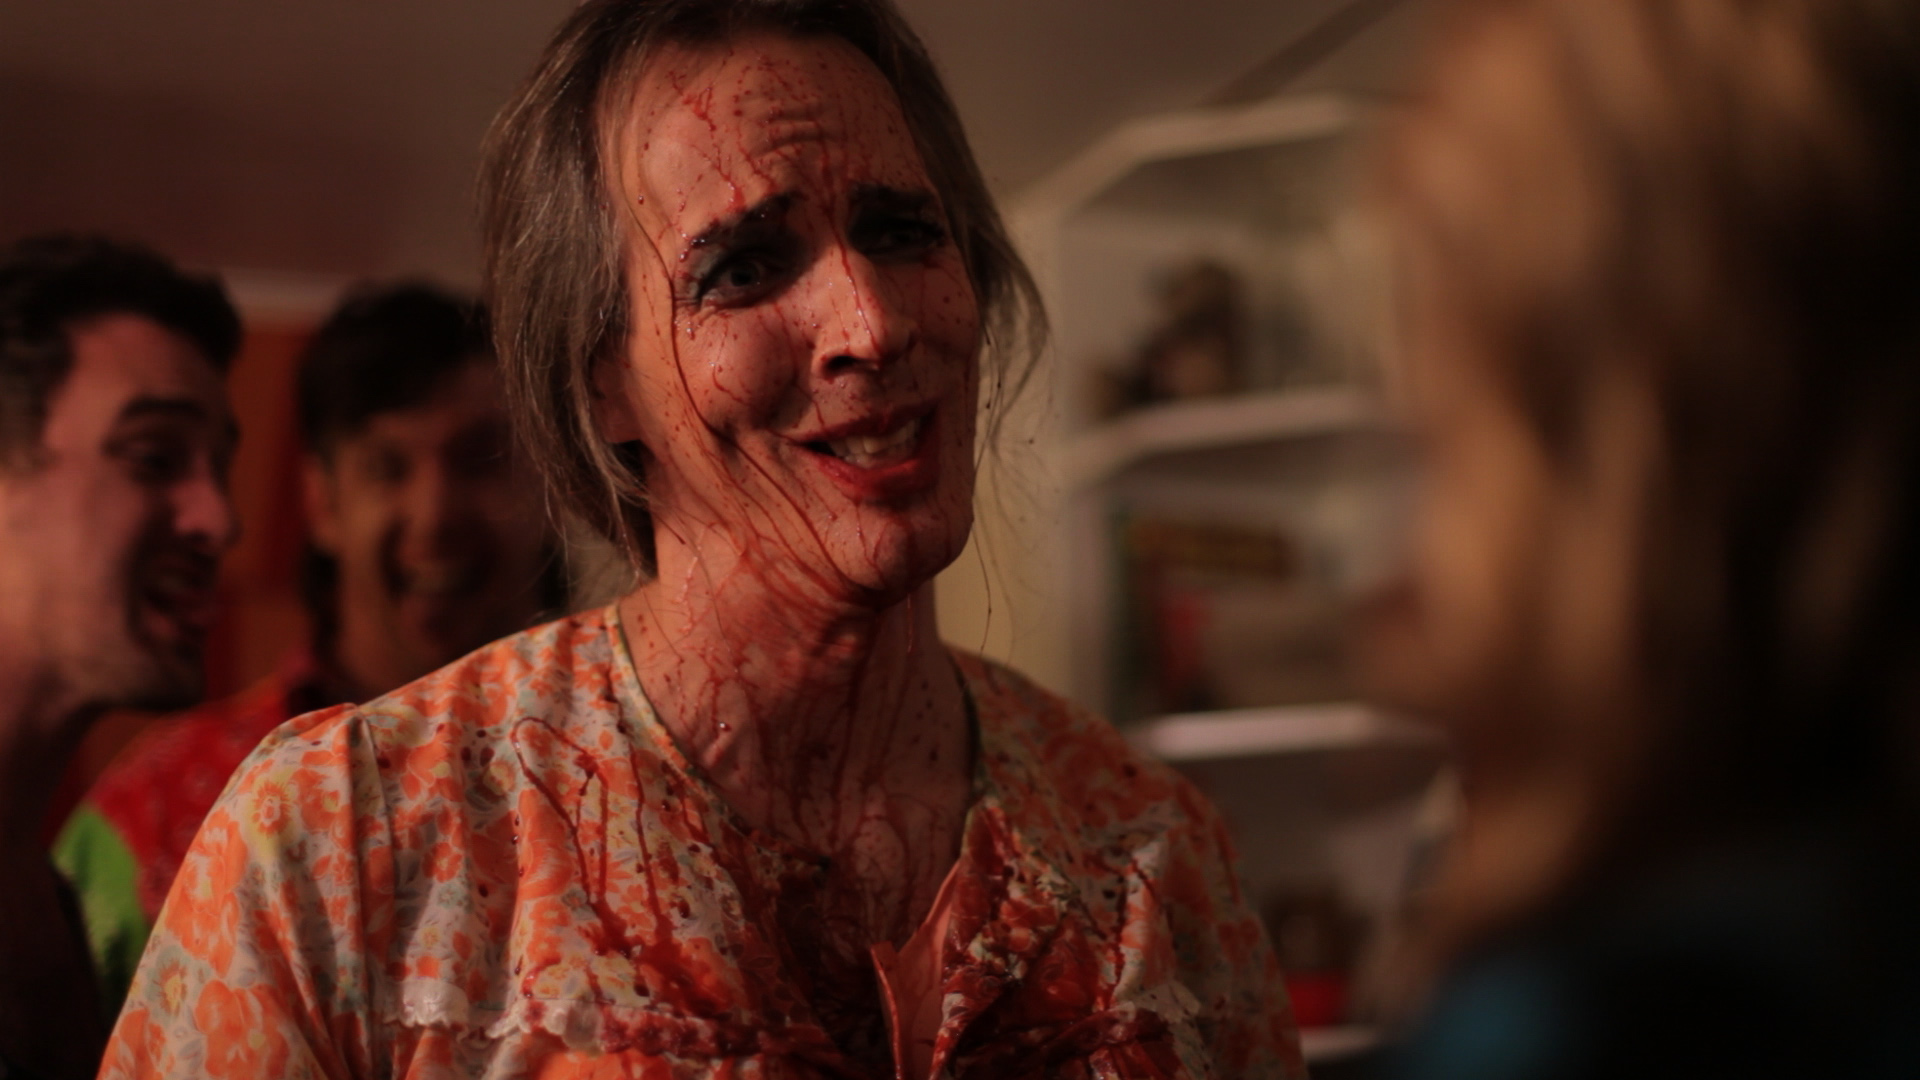 Joe Grisaffi as Momma in The Haunted Trailer. www.facebook.com/hauntedtrailer www.facebook.com/joegrisaffi